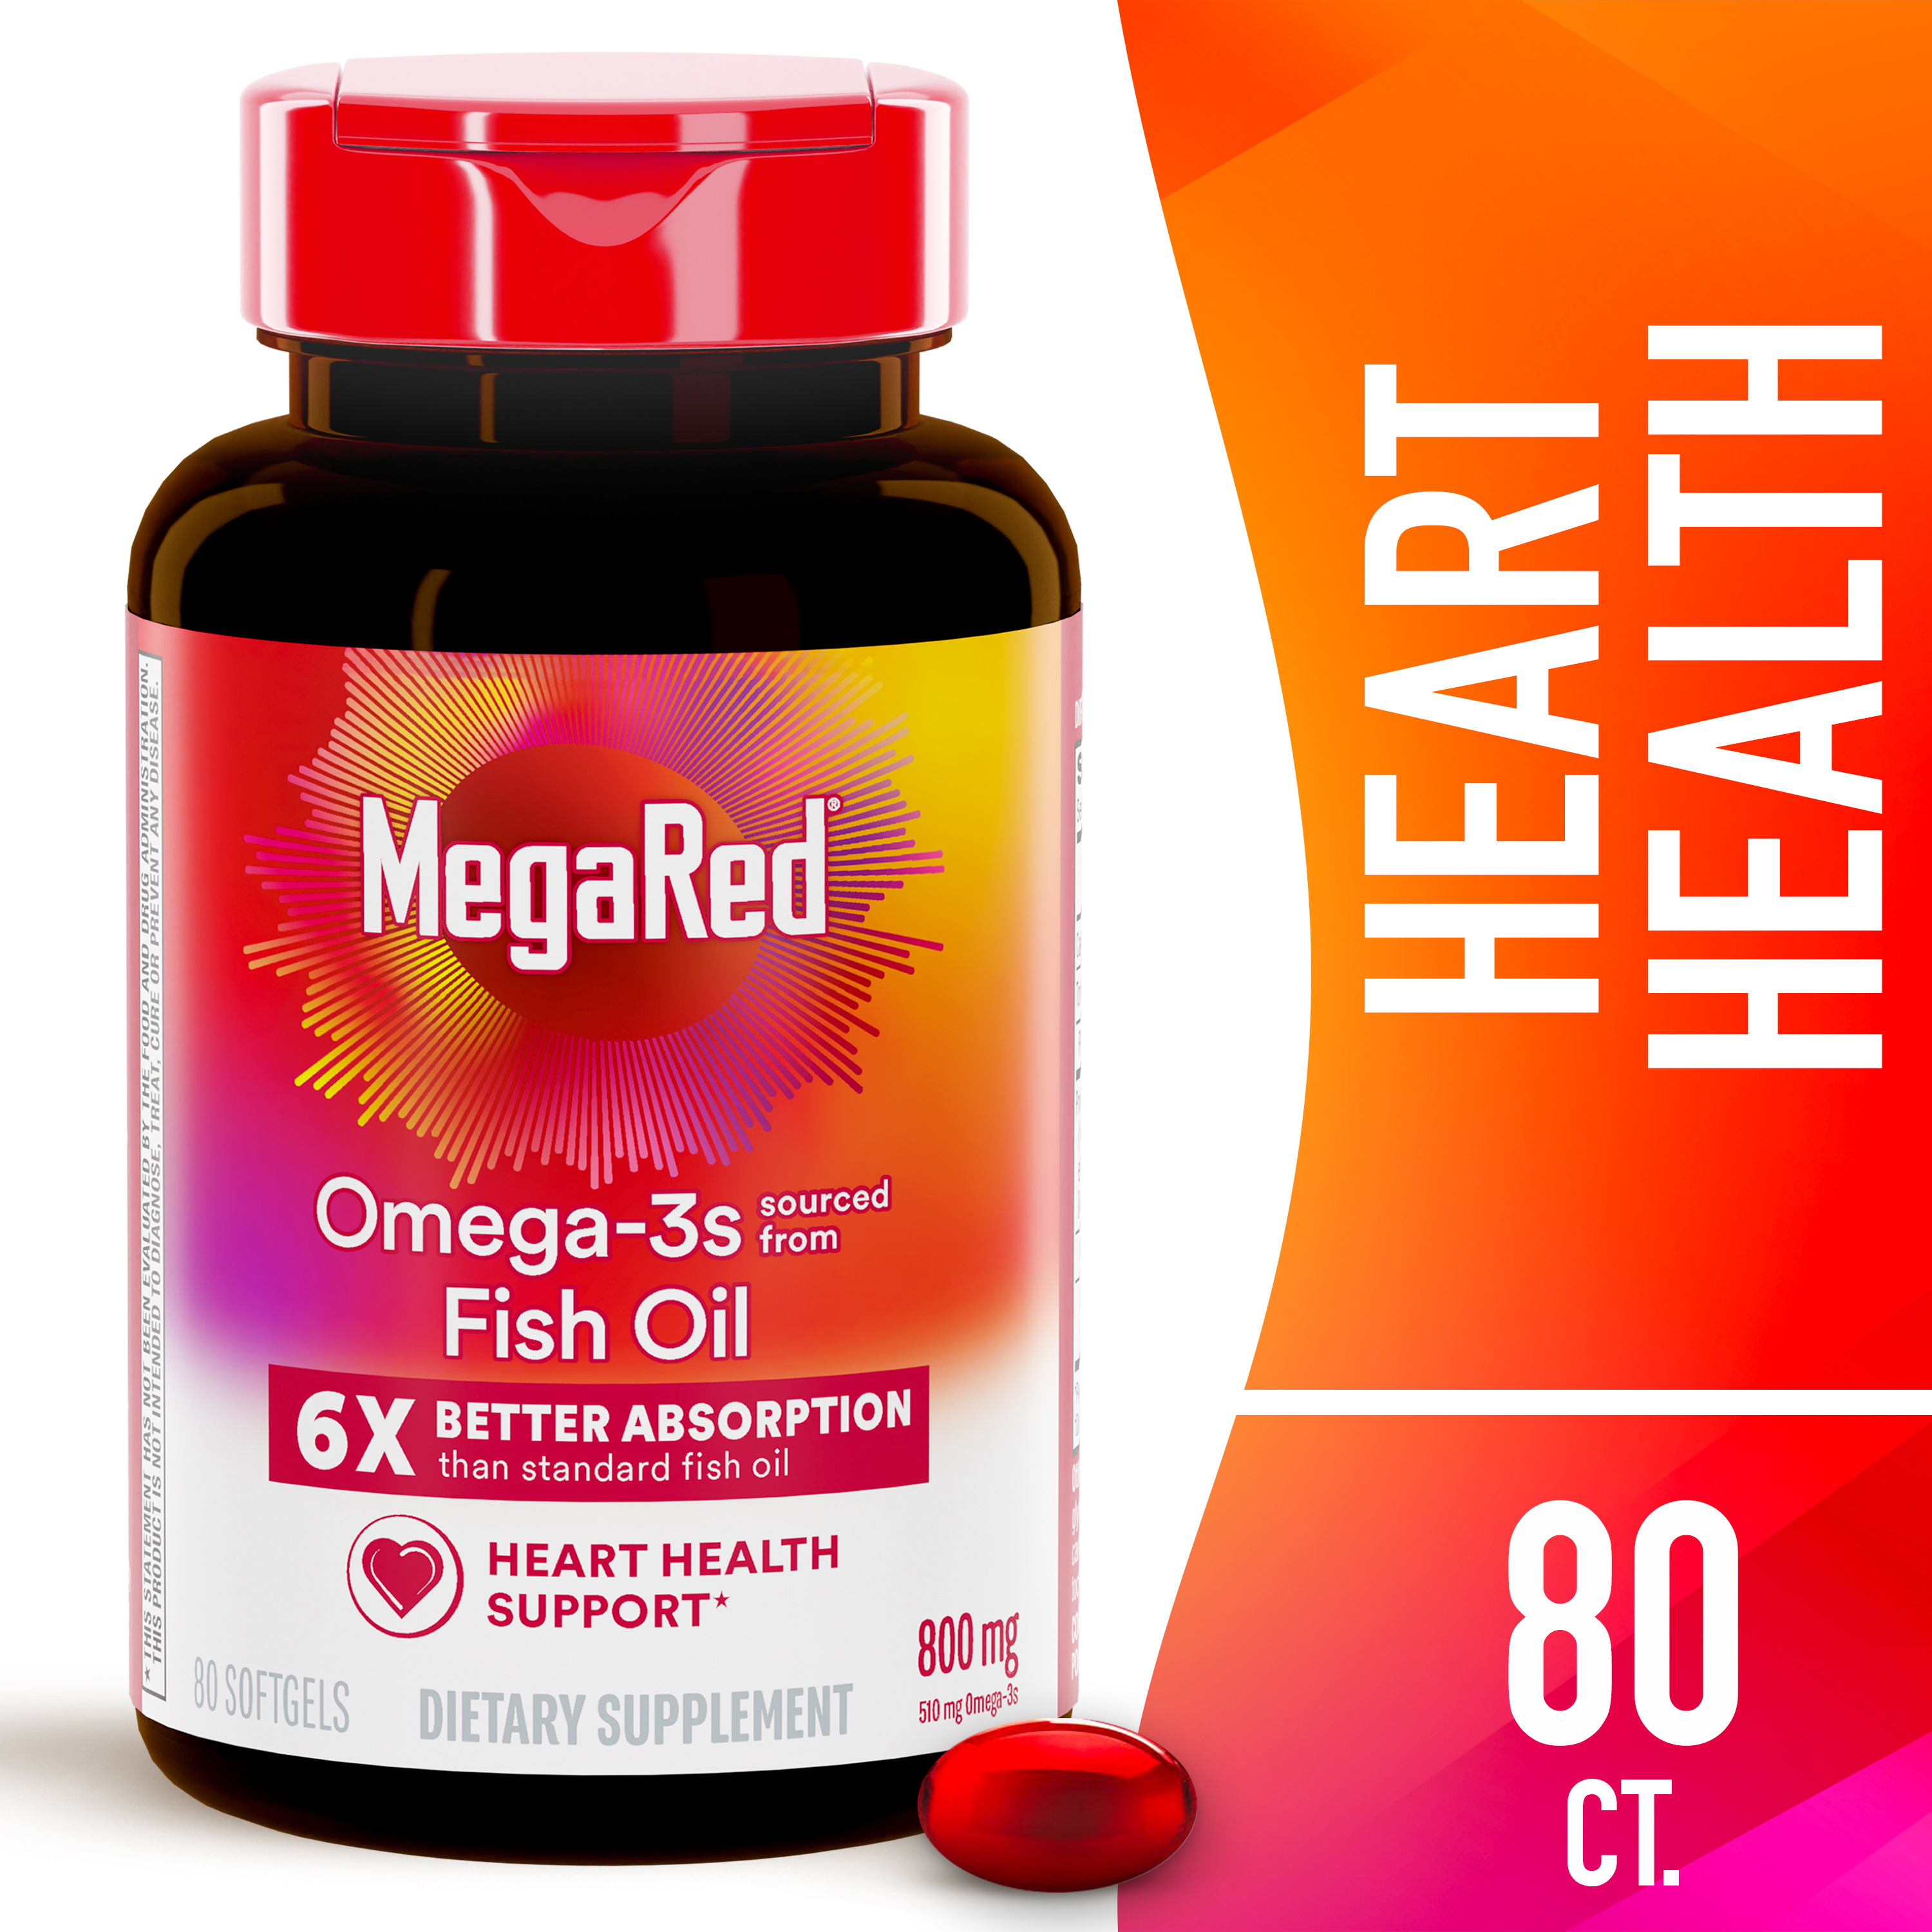 MegaRed Advanced 800mg 6X Absorption Softgels (80 Count In A Box), Omega-3 Fish Oil Supplement - image 1 of 6